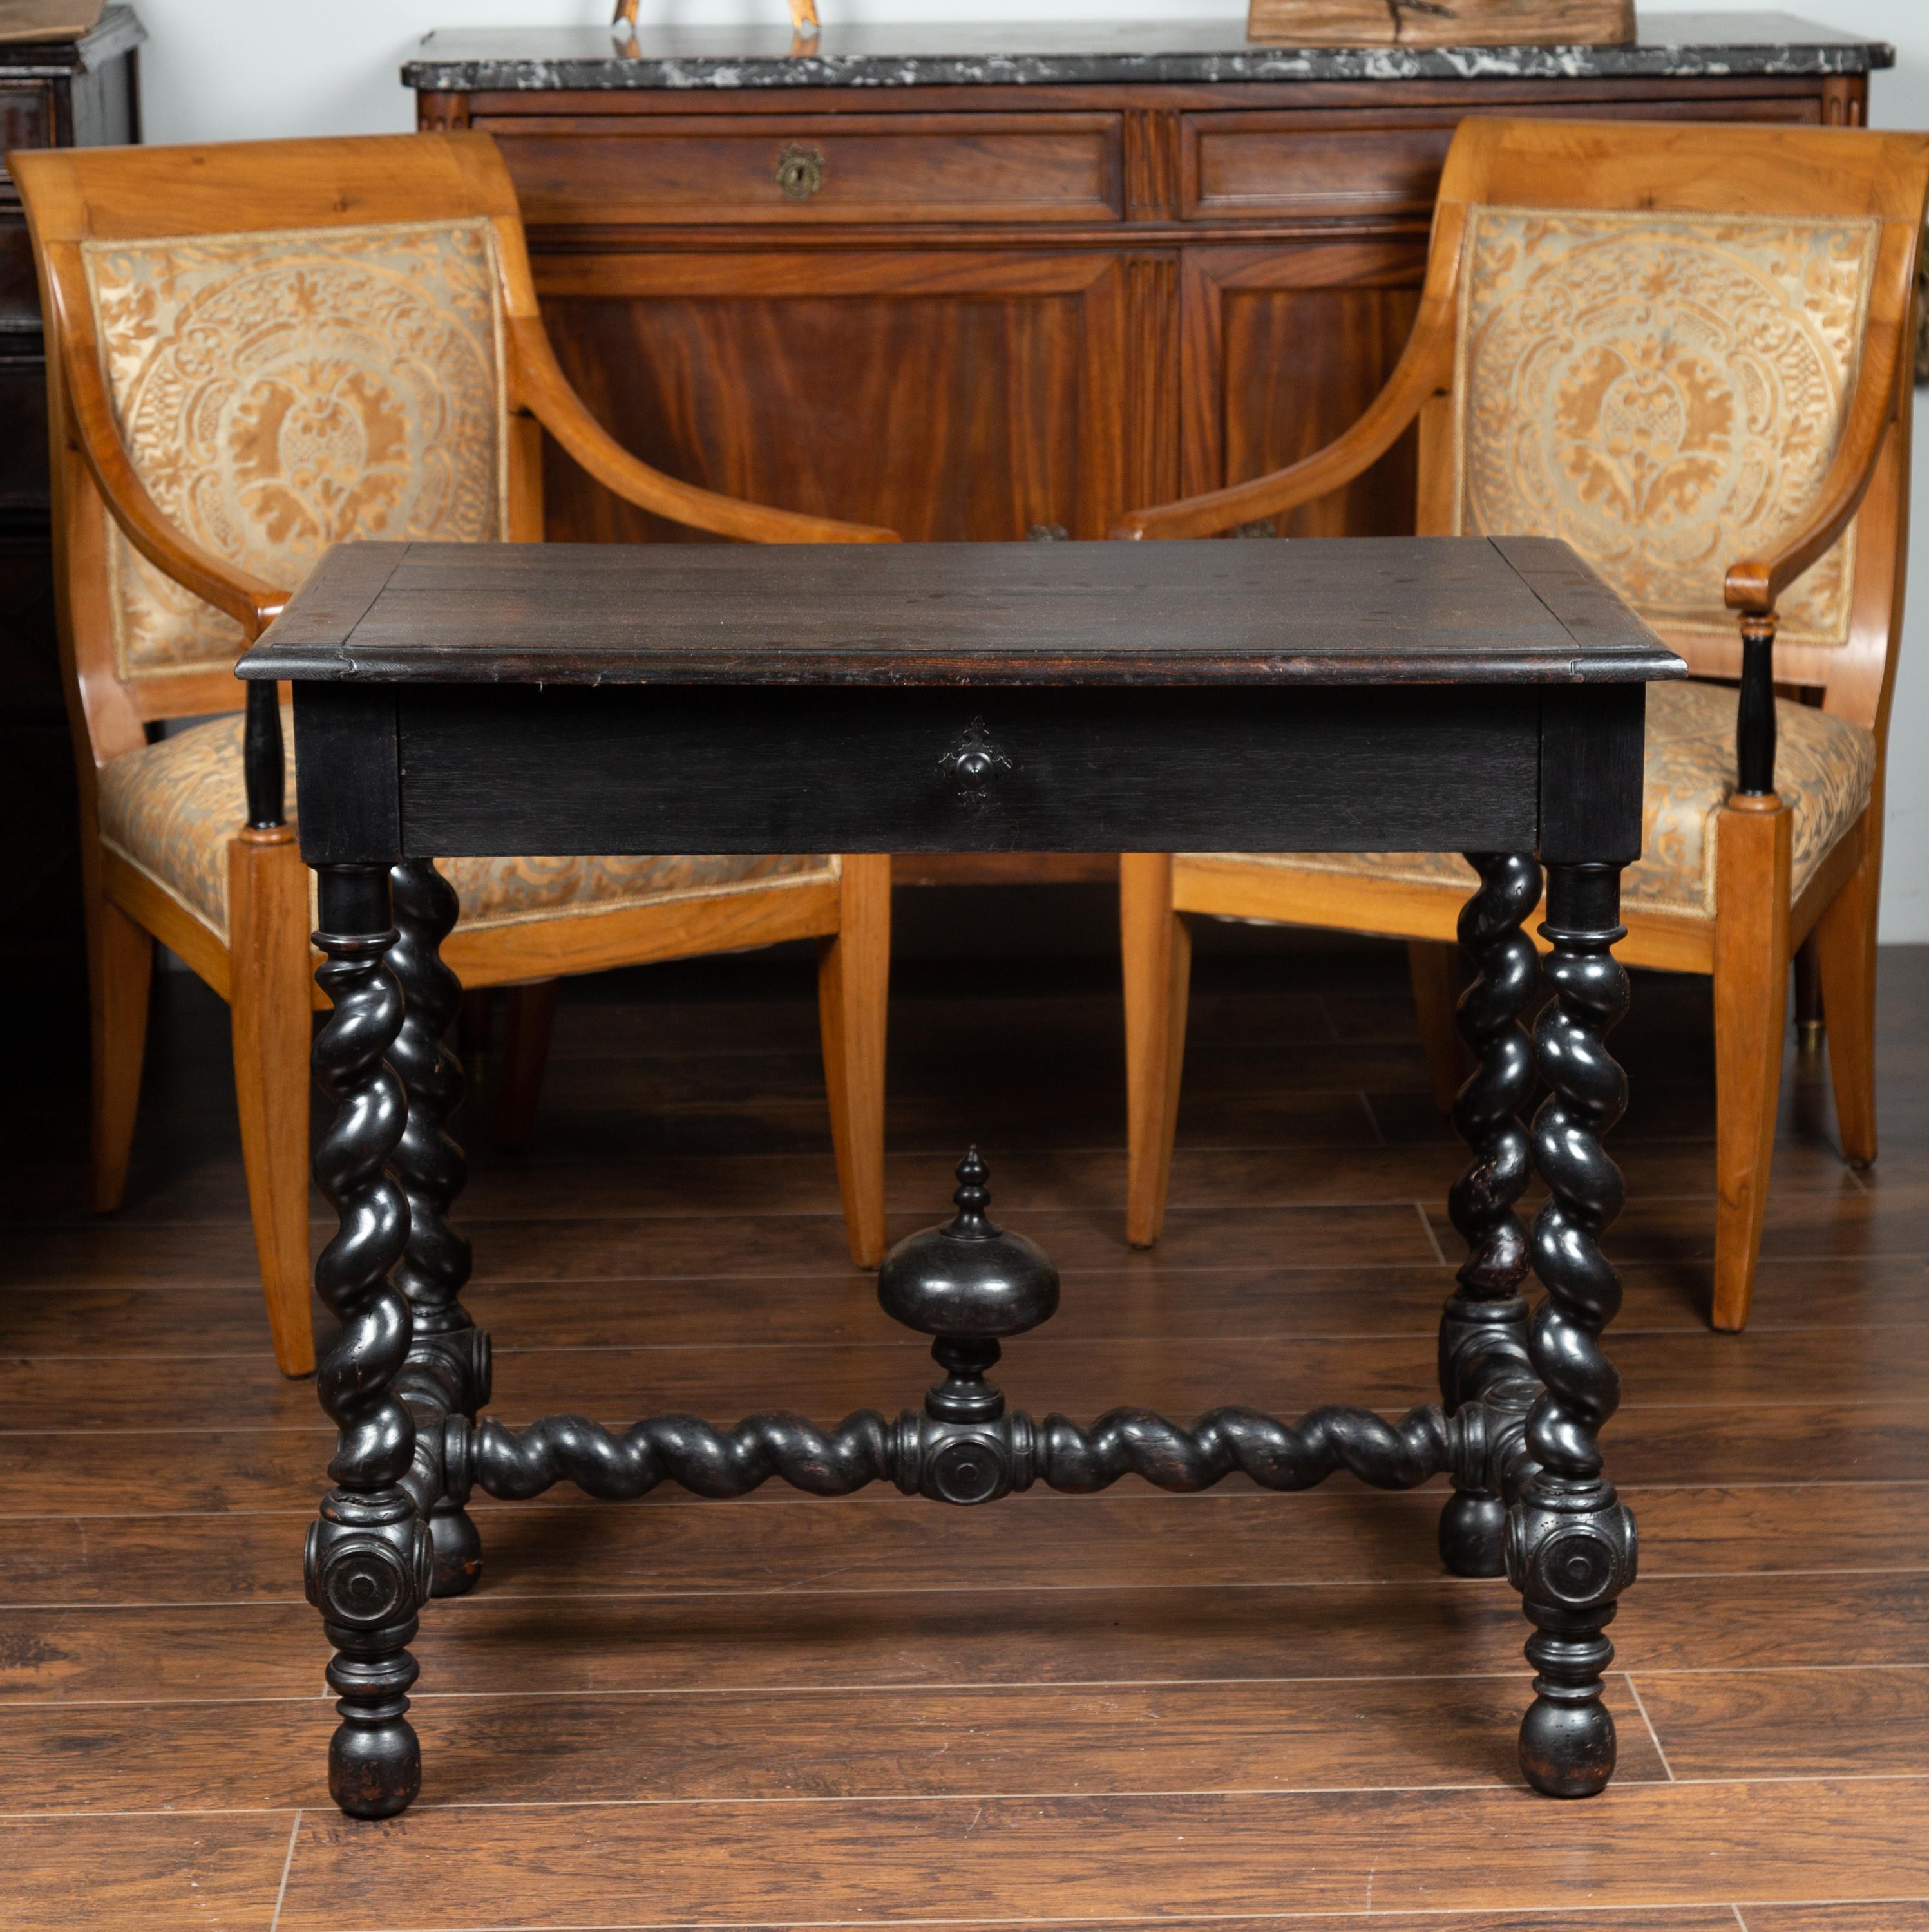 A French Louis XIII style ebonized wood side table from the third quarter of the 19th century, with single drawer, barley twist base and carved finial. Born in France at the end of emperor Napoleon III's reign, this exquisite side table attracts our